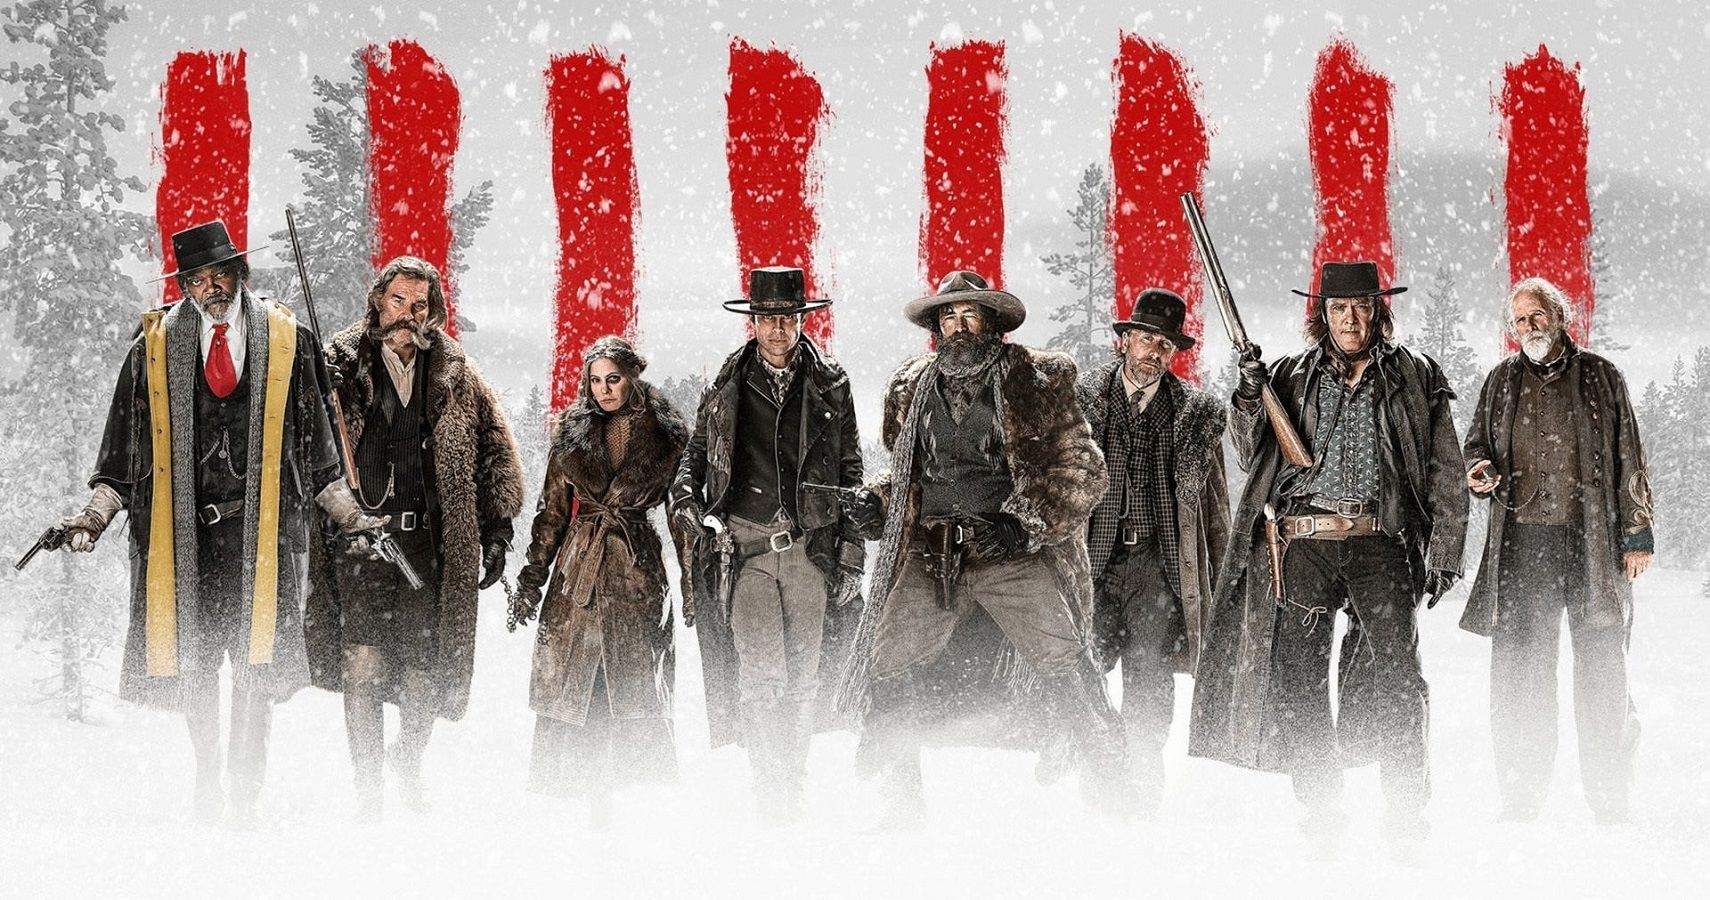 The Hateful Eight 10 Behind The Scenes Facts About The Making Of Tarantinos Eighth Film